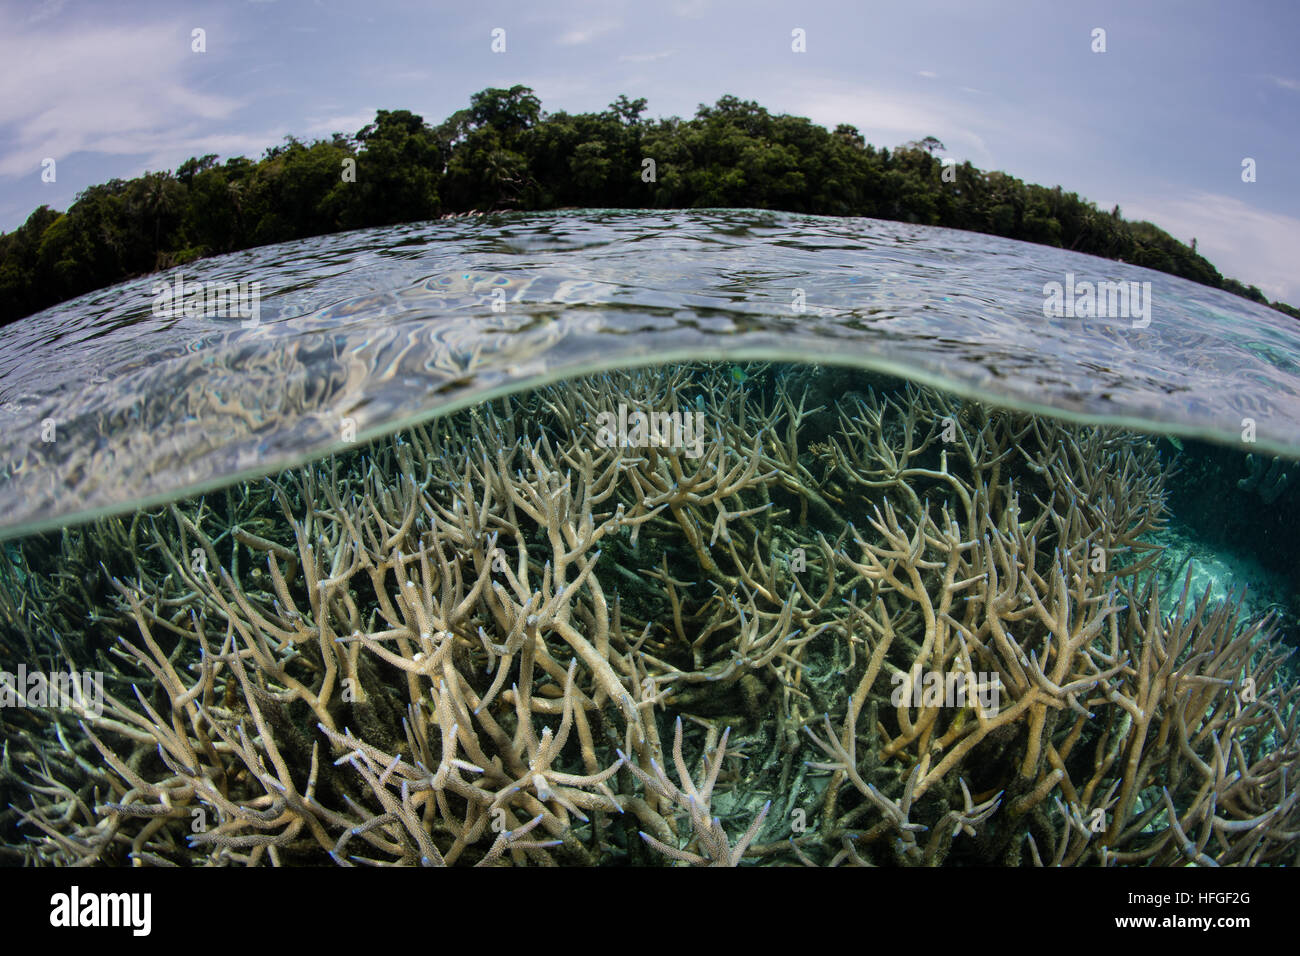 Fragile staghorn corals grow in shallow water in the Solomon Islands. This region is known for its high marine biodiversity. Stock Photo